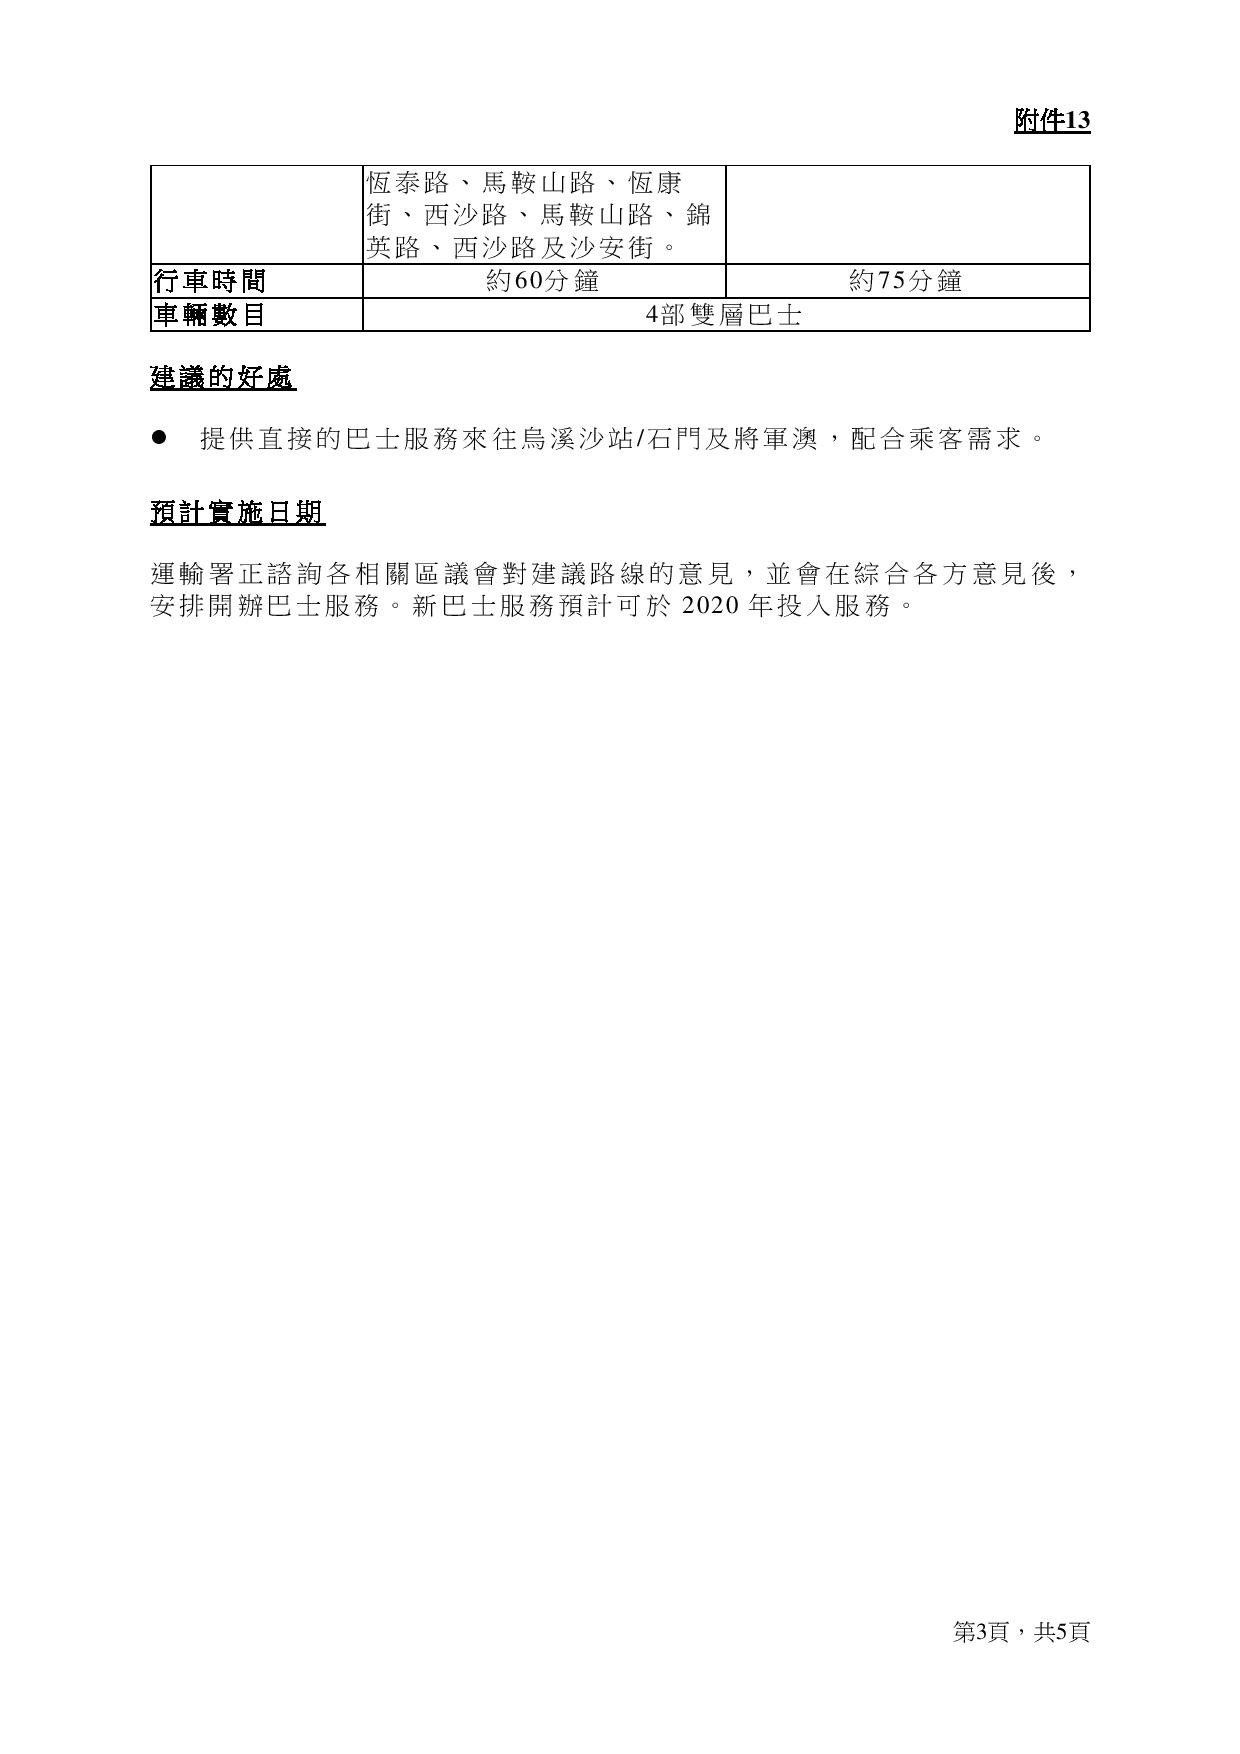 Document-page-058.jpg